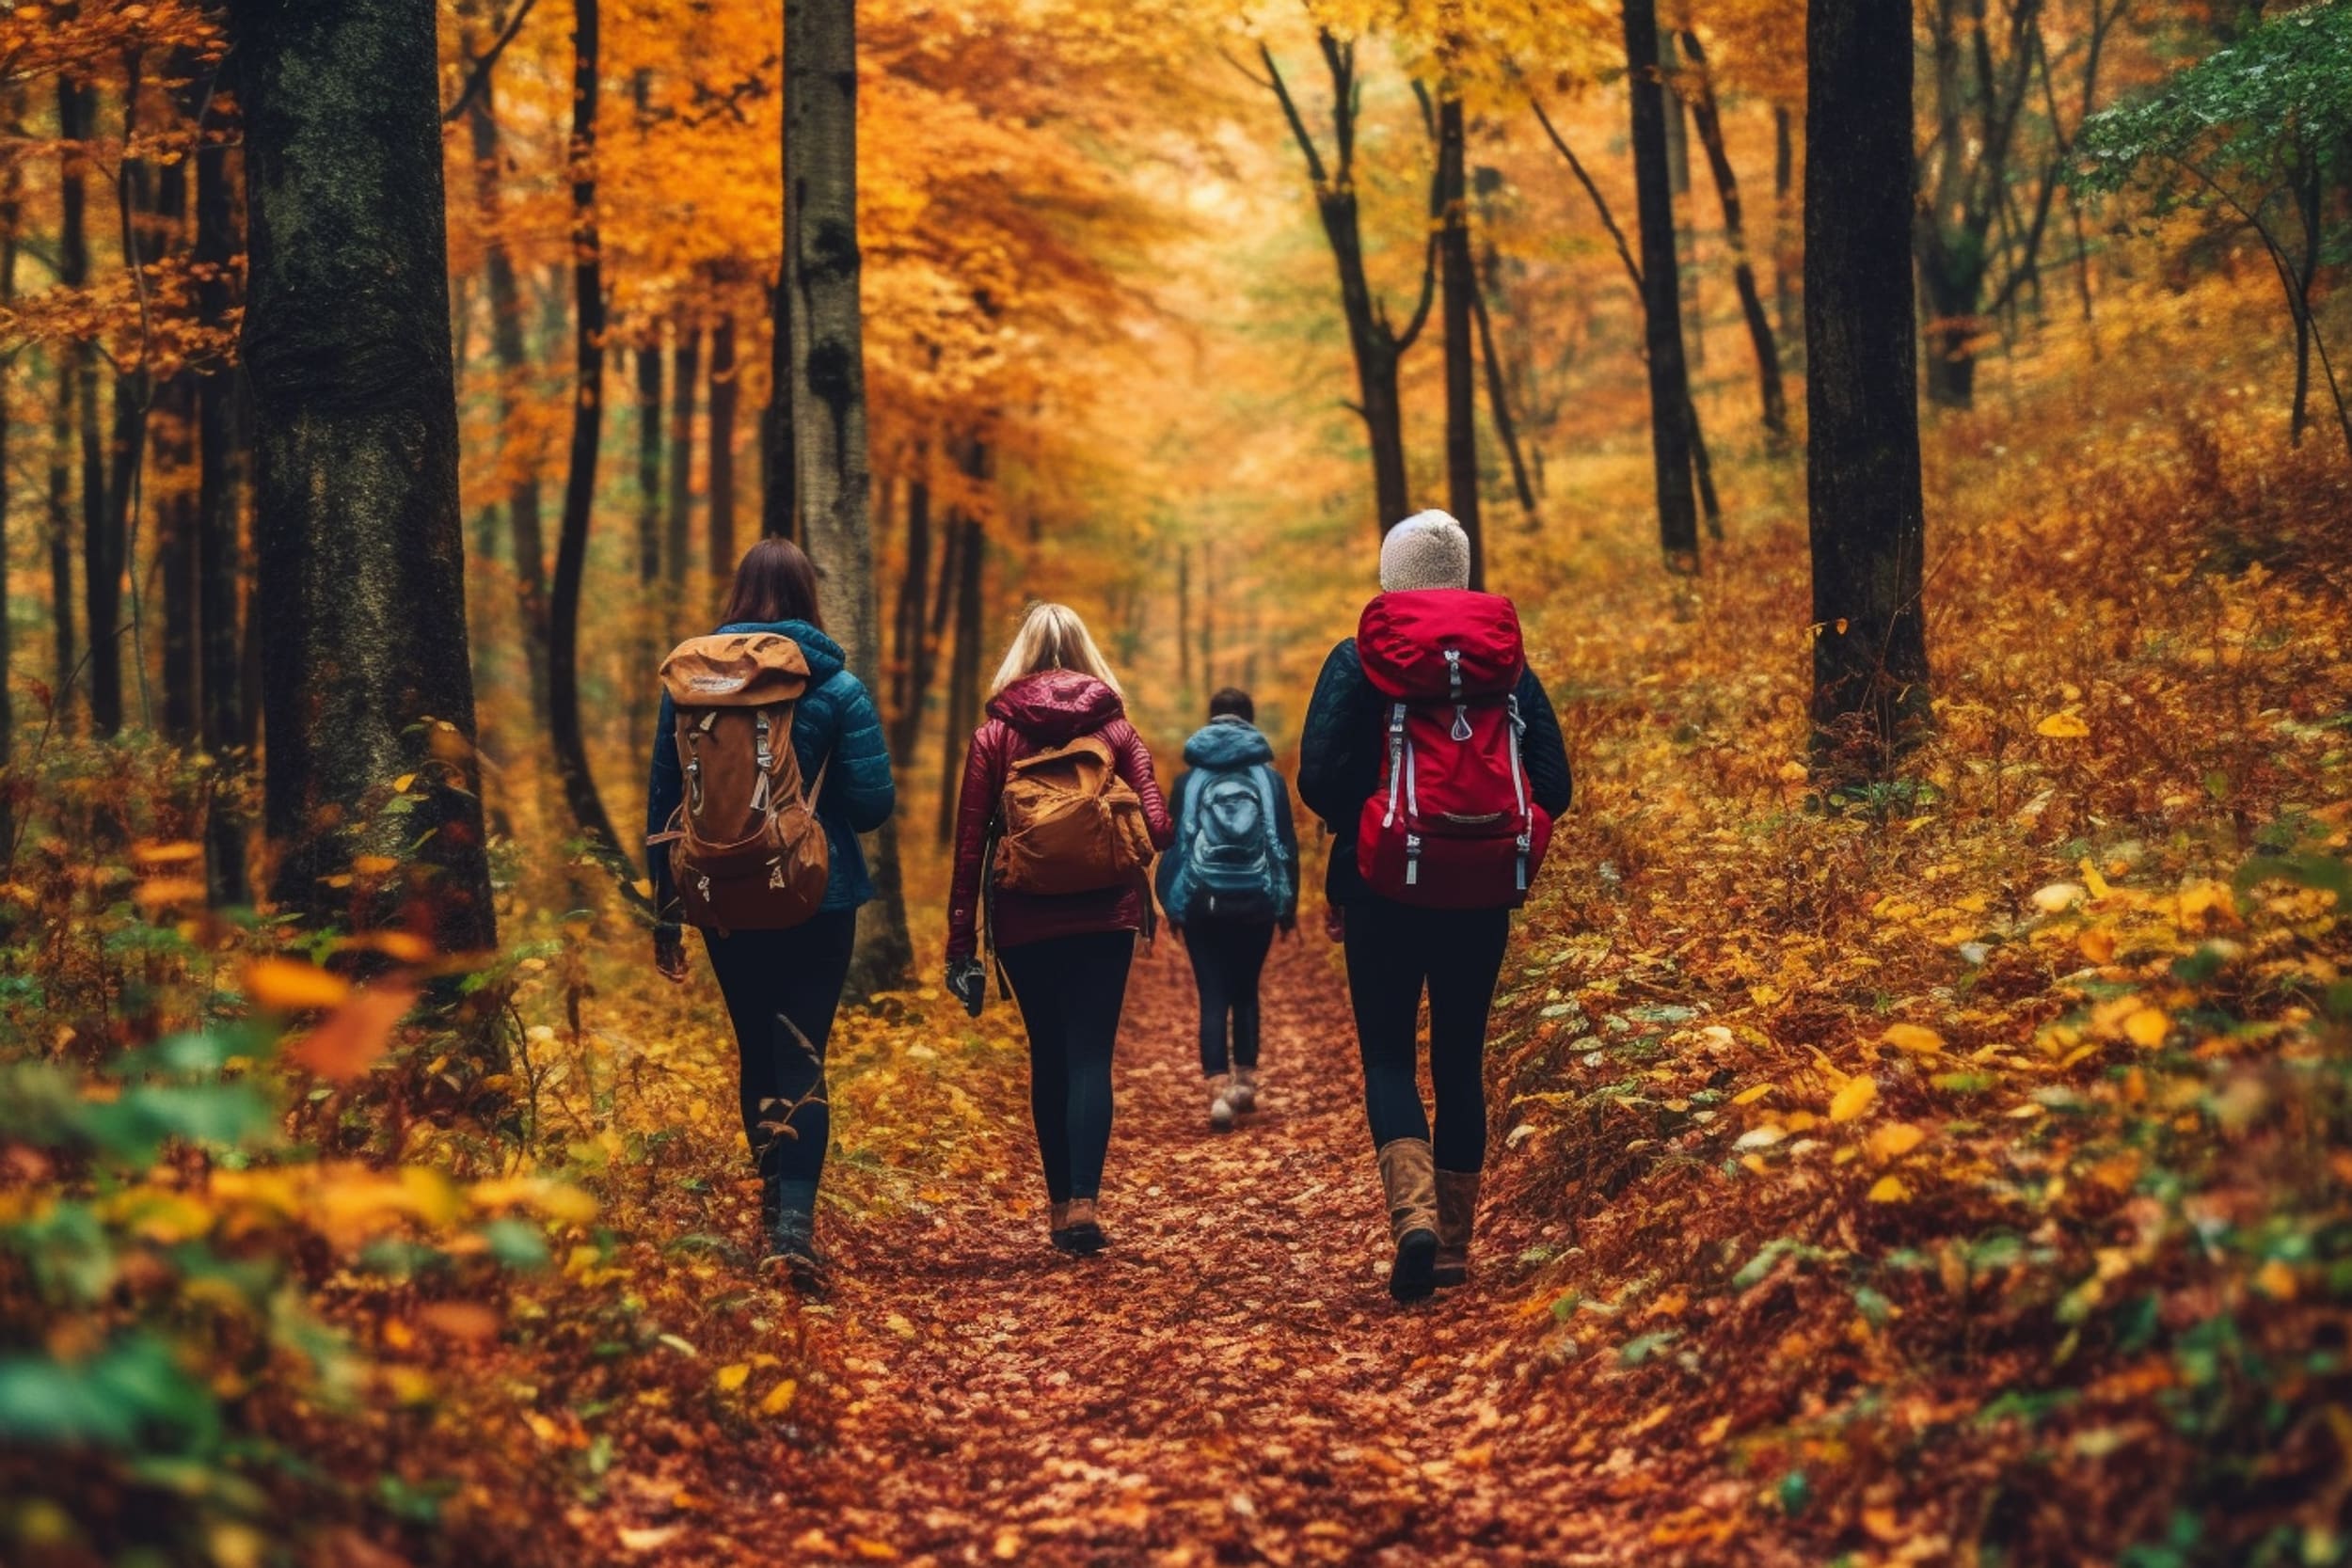 A group of four hiking through the woods in a beautiful display of orange, red and golden leaves.